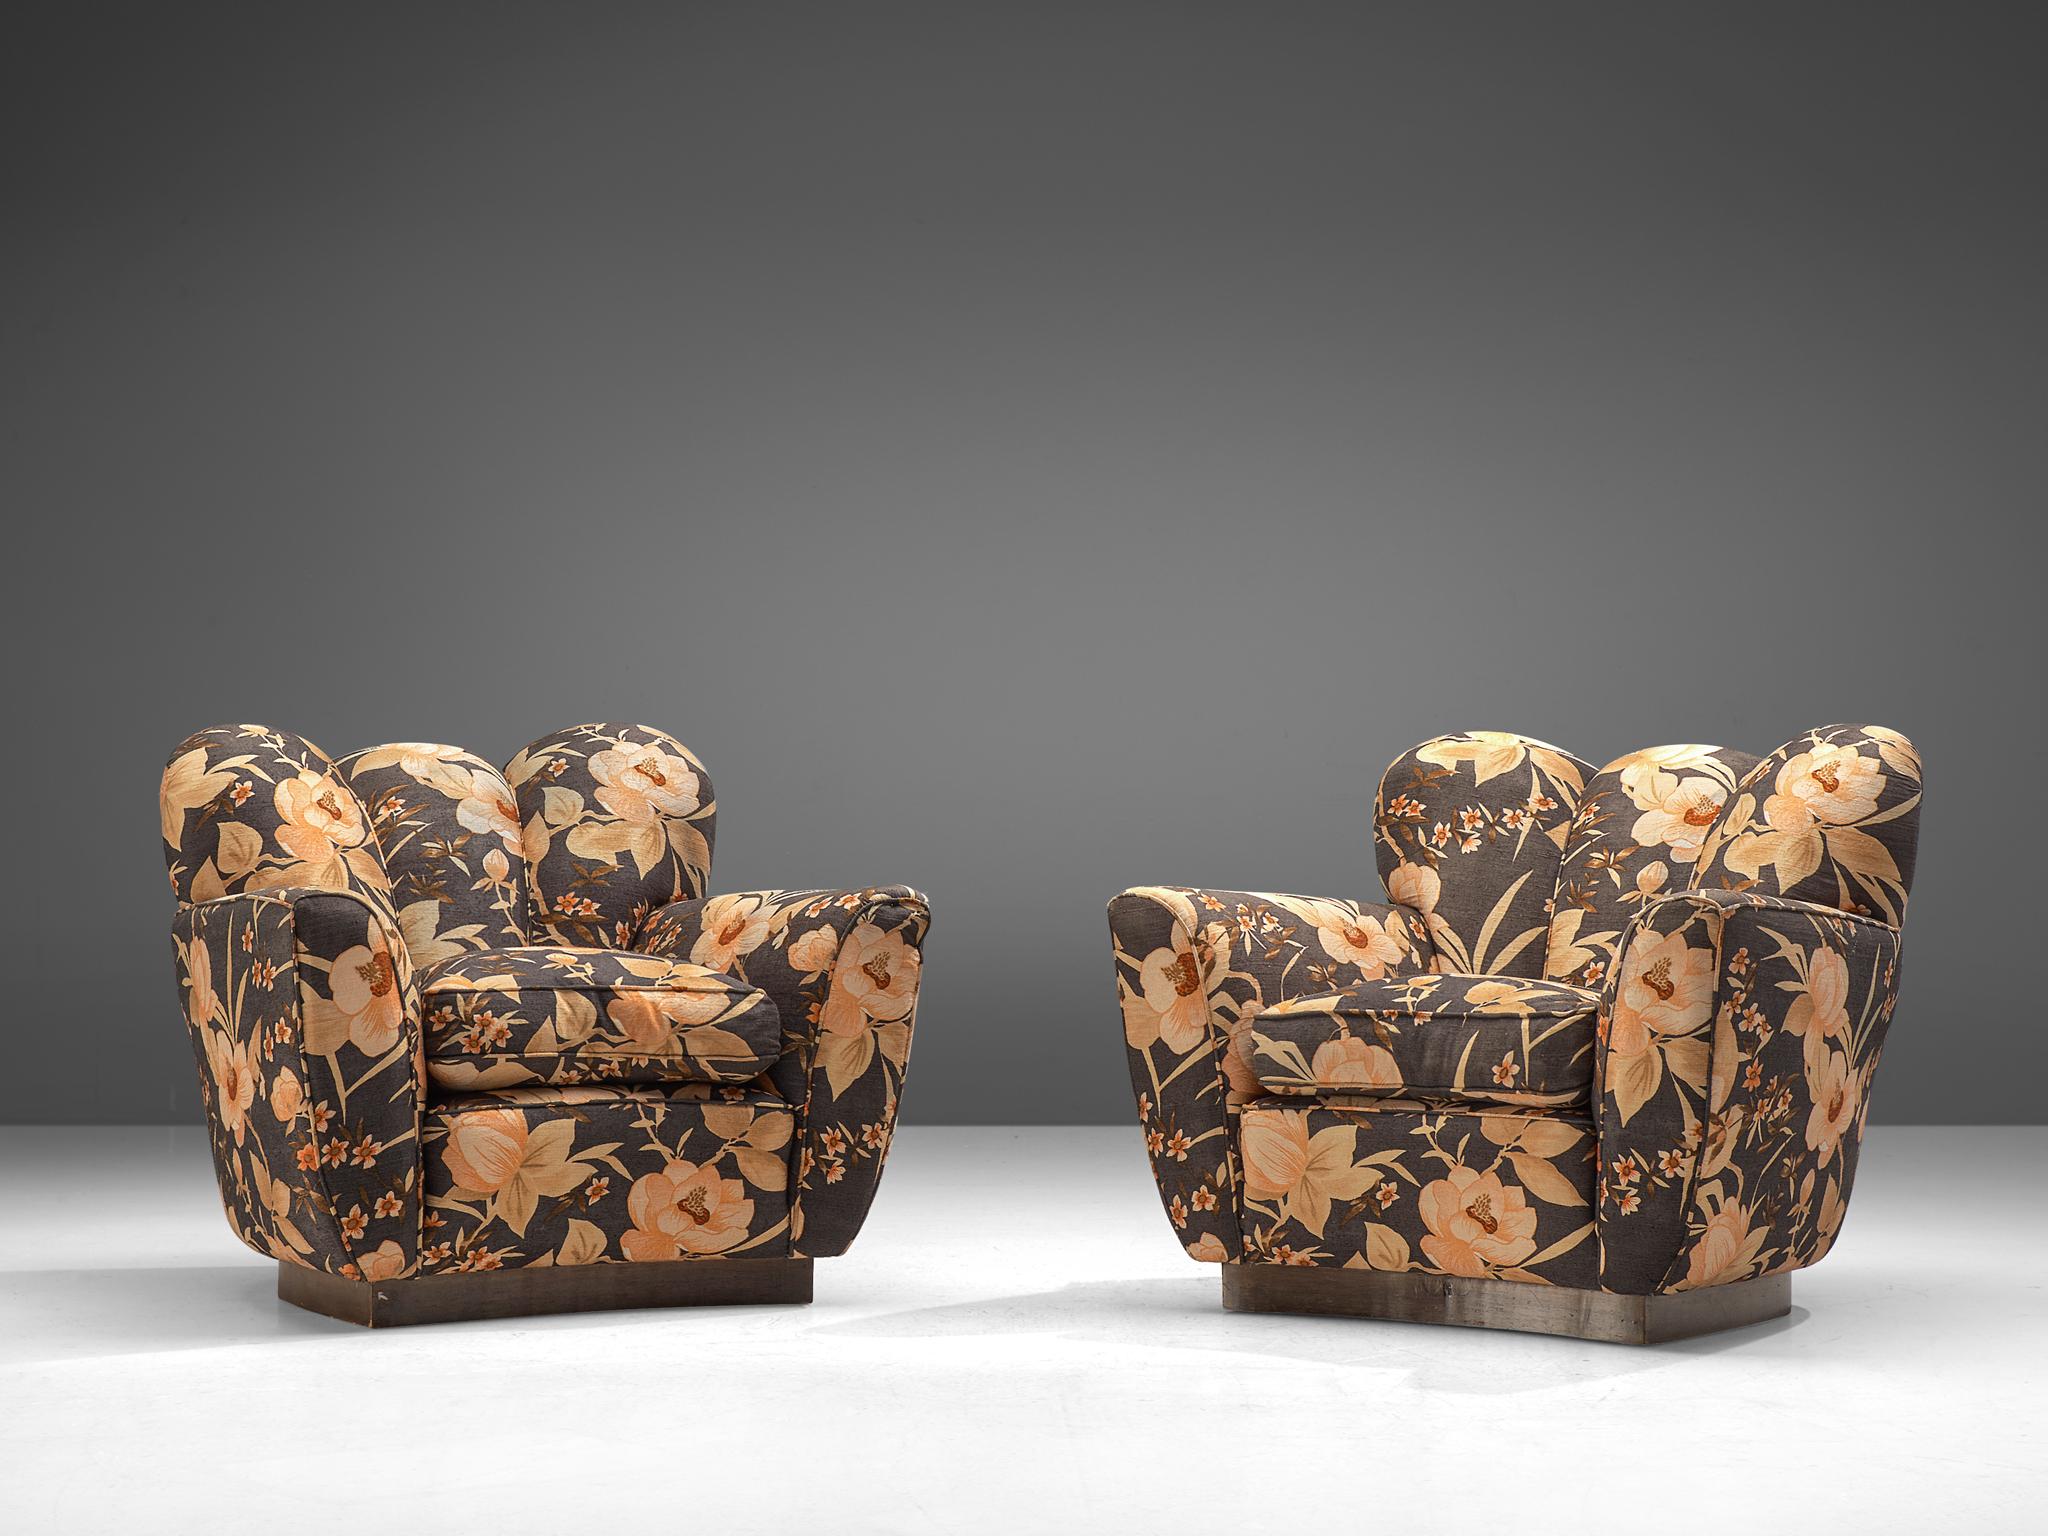 Pair of club chairs manufactured by Molteni, floral fabric and wood, Italy, 1960s.

Voluptuous set of lounge chairs being a wonderful example of Italian design from the 1950s. The chairs are bold and curvy, yet very elegant thanks to its clear